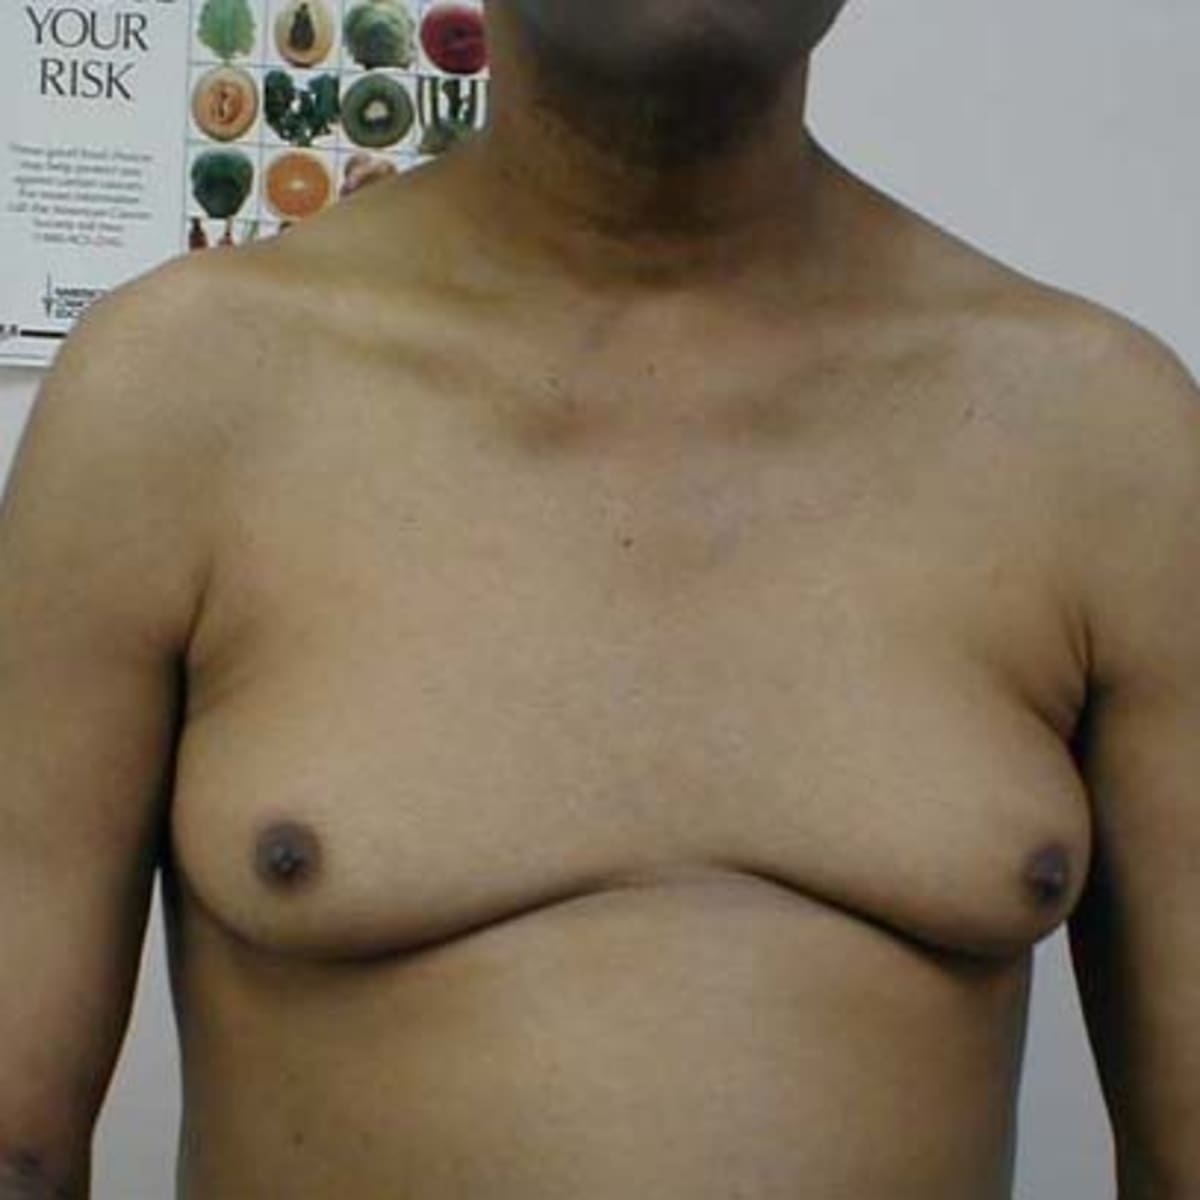 Man grew 38C breasts as a teenager - and now lives as a woman